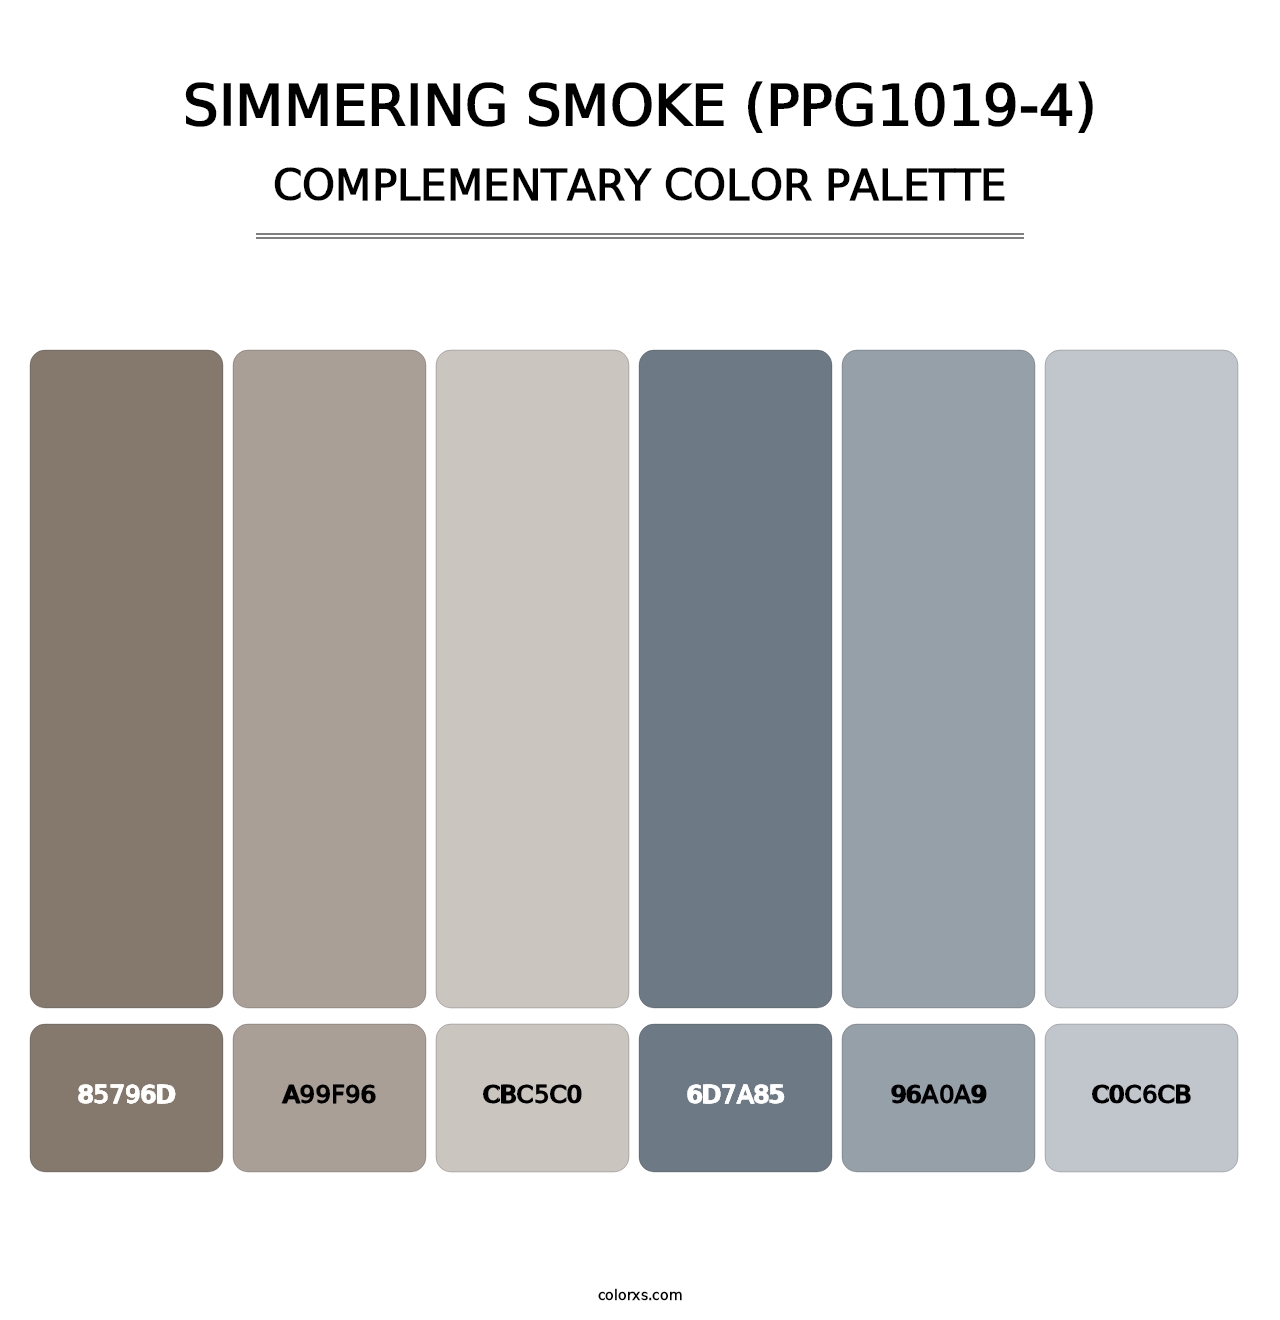 Simmering Smoke (PPG1019-4) - Complementary Color Palette